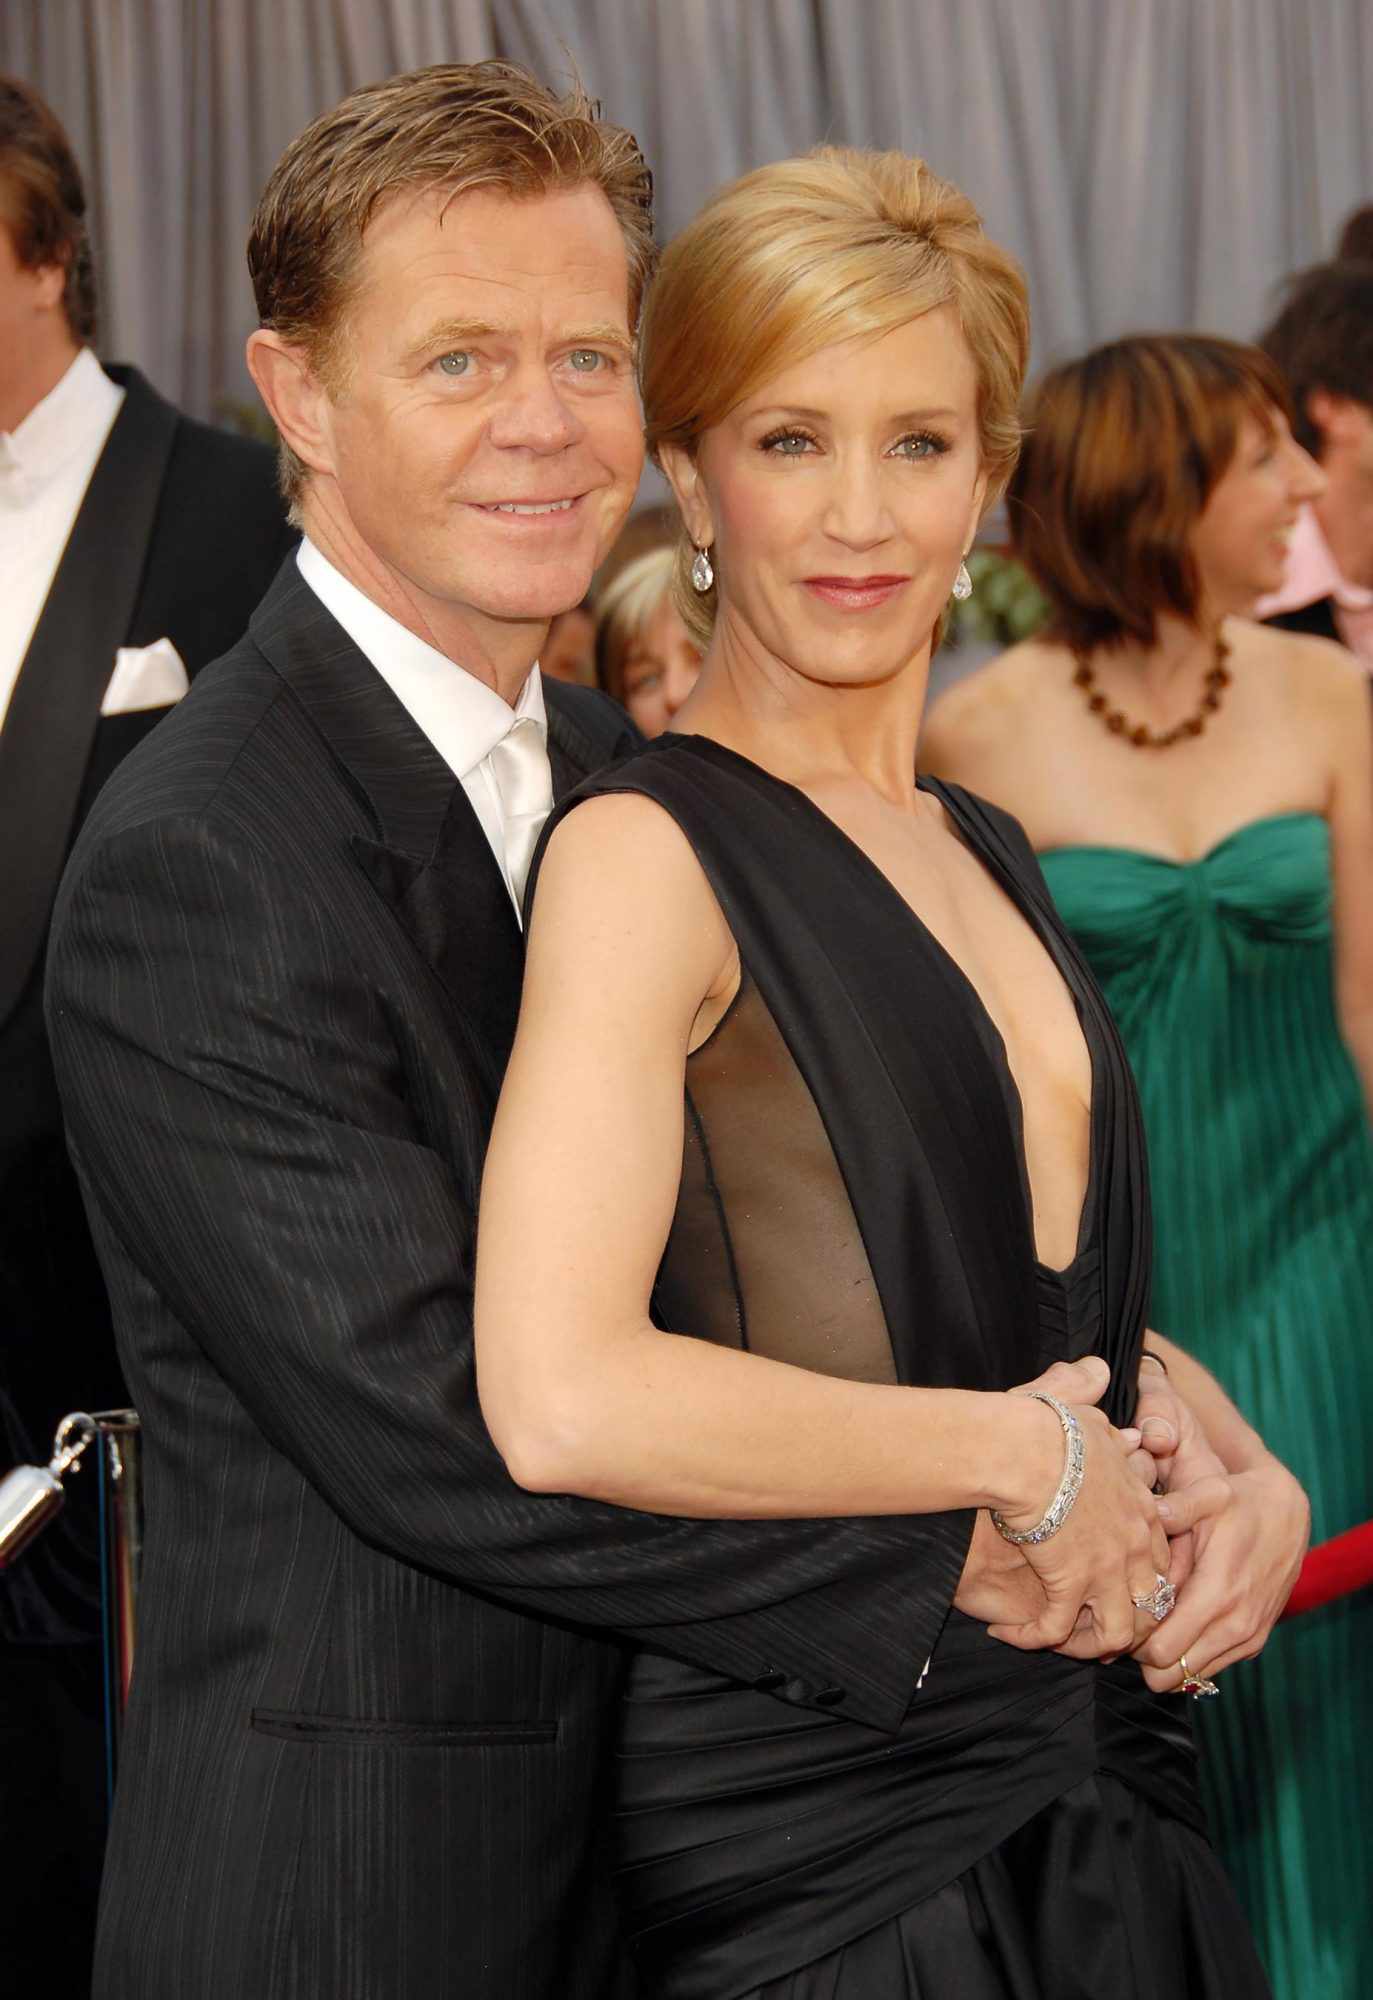 William H. Macy and Felicity Huffman at the 78th Annual Academy Awards on&nbsp;March 5, 2006